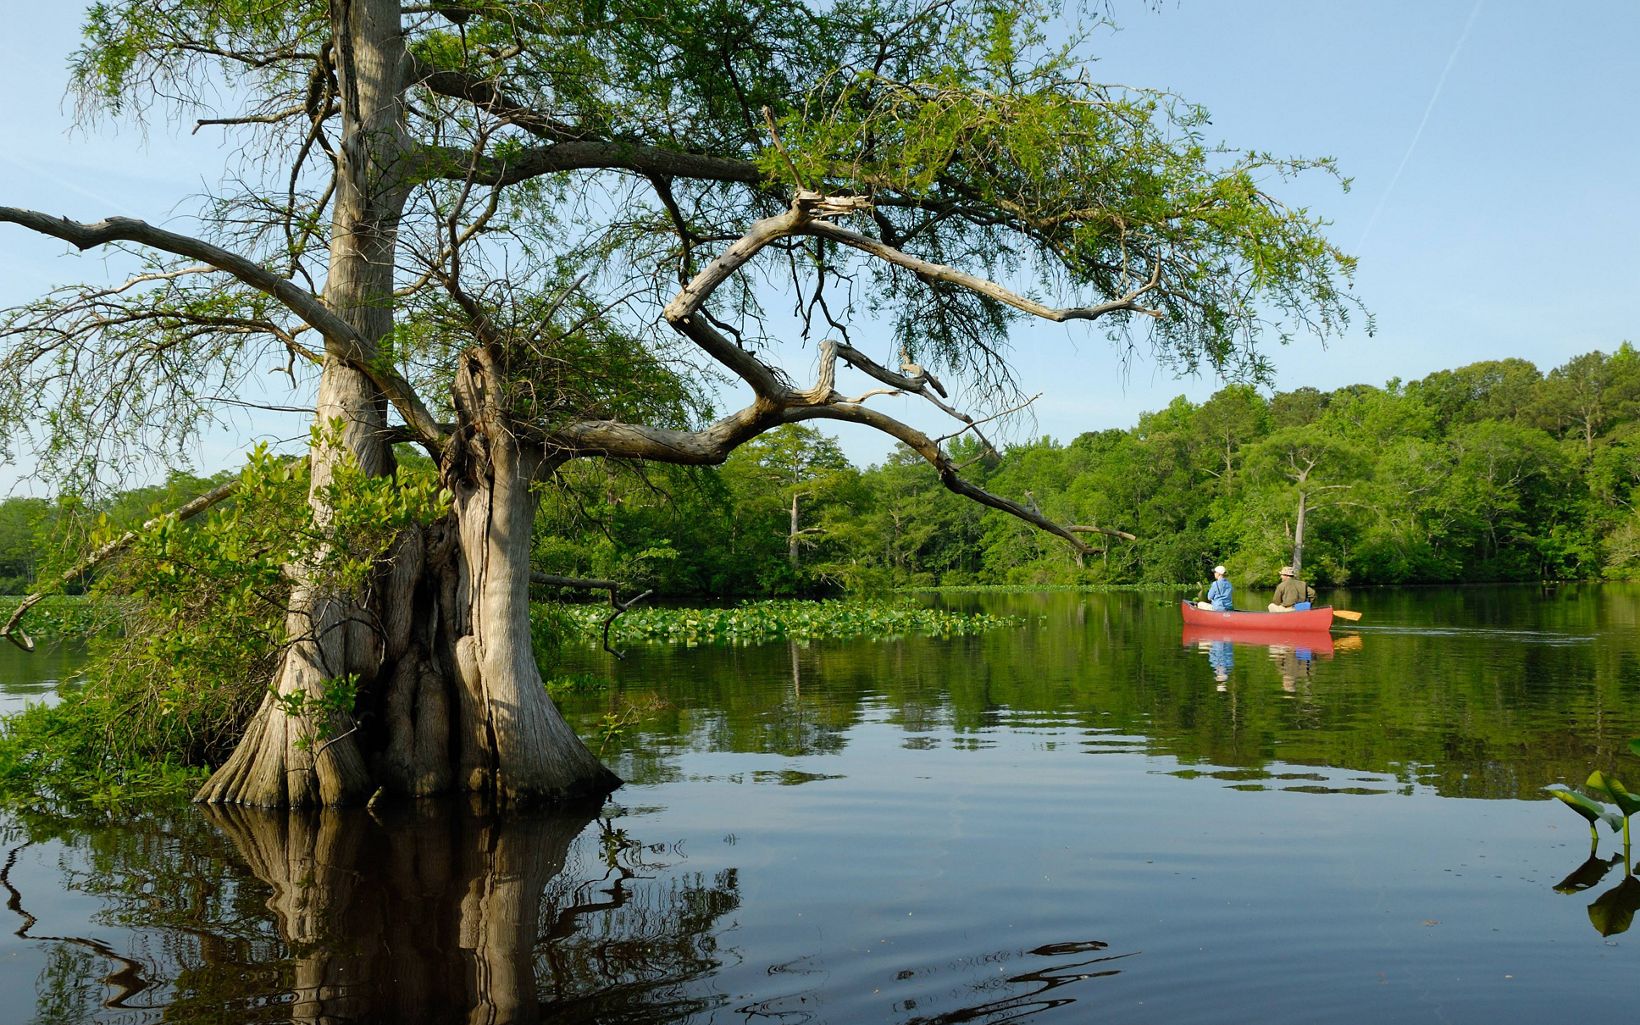 Two men paddle a red canoe through the flat, still water of Nassawango Creek. The foreground is dominated by a cypress tree with wide spreading branches.